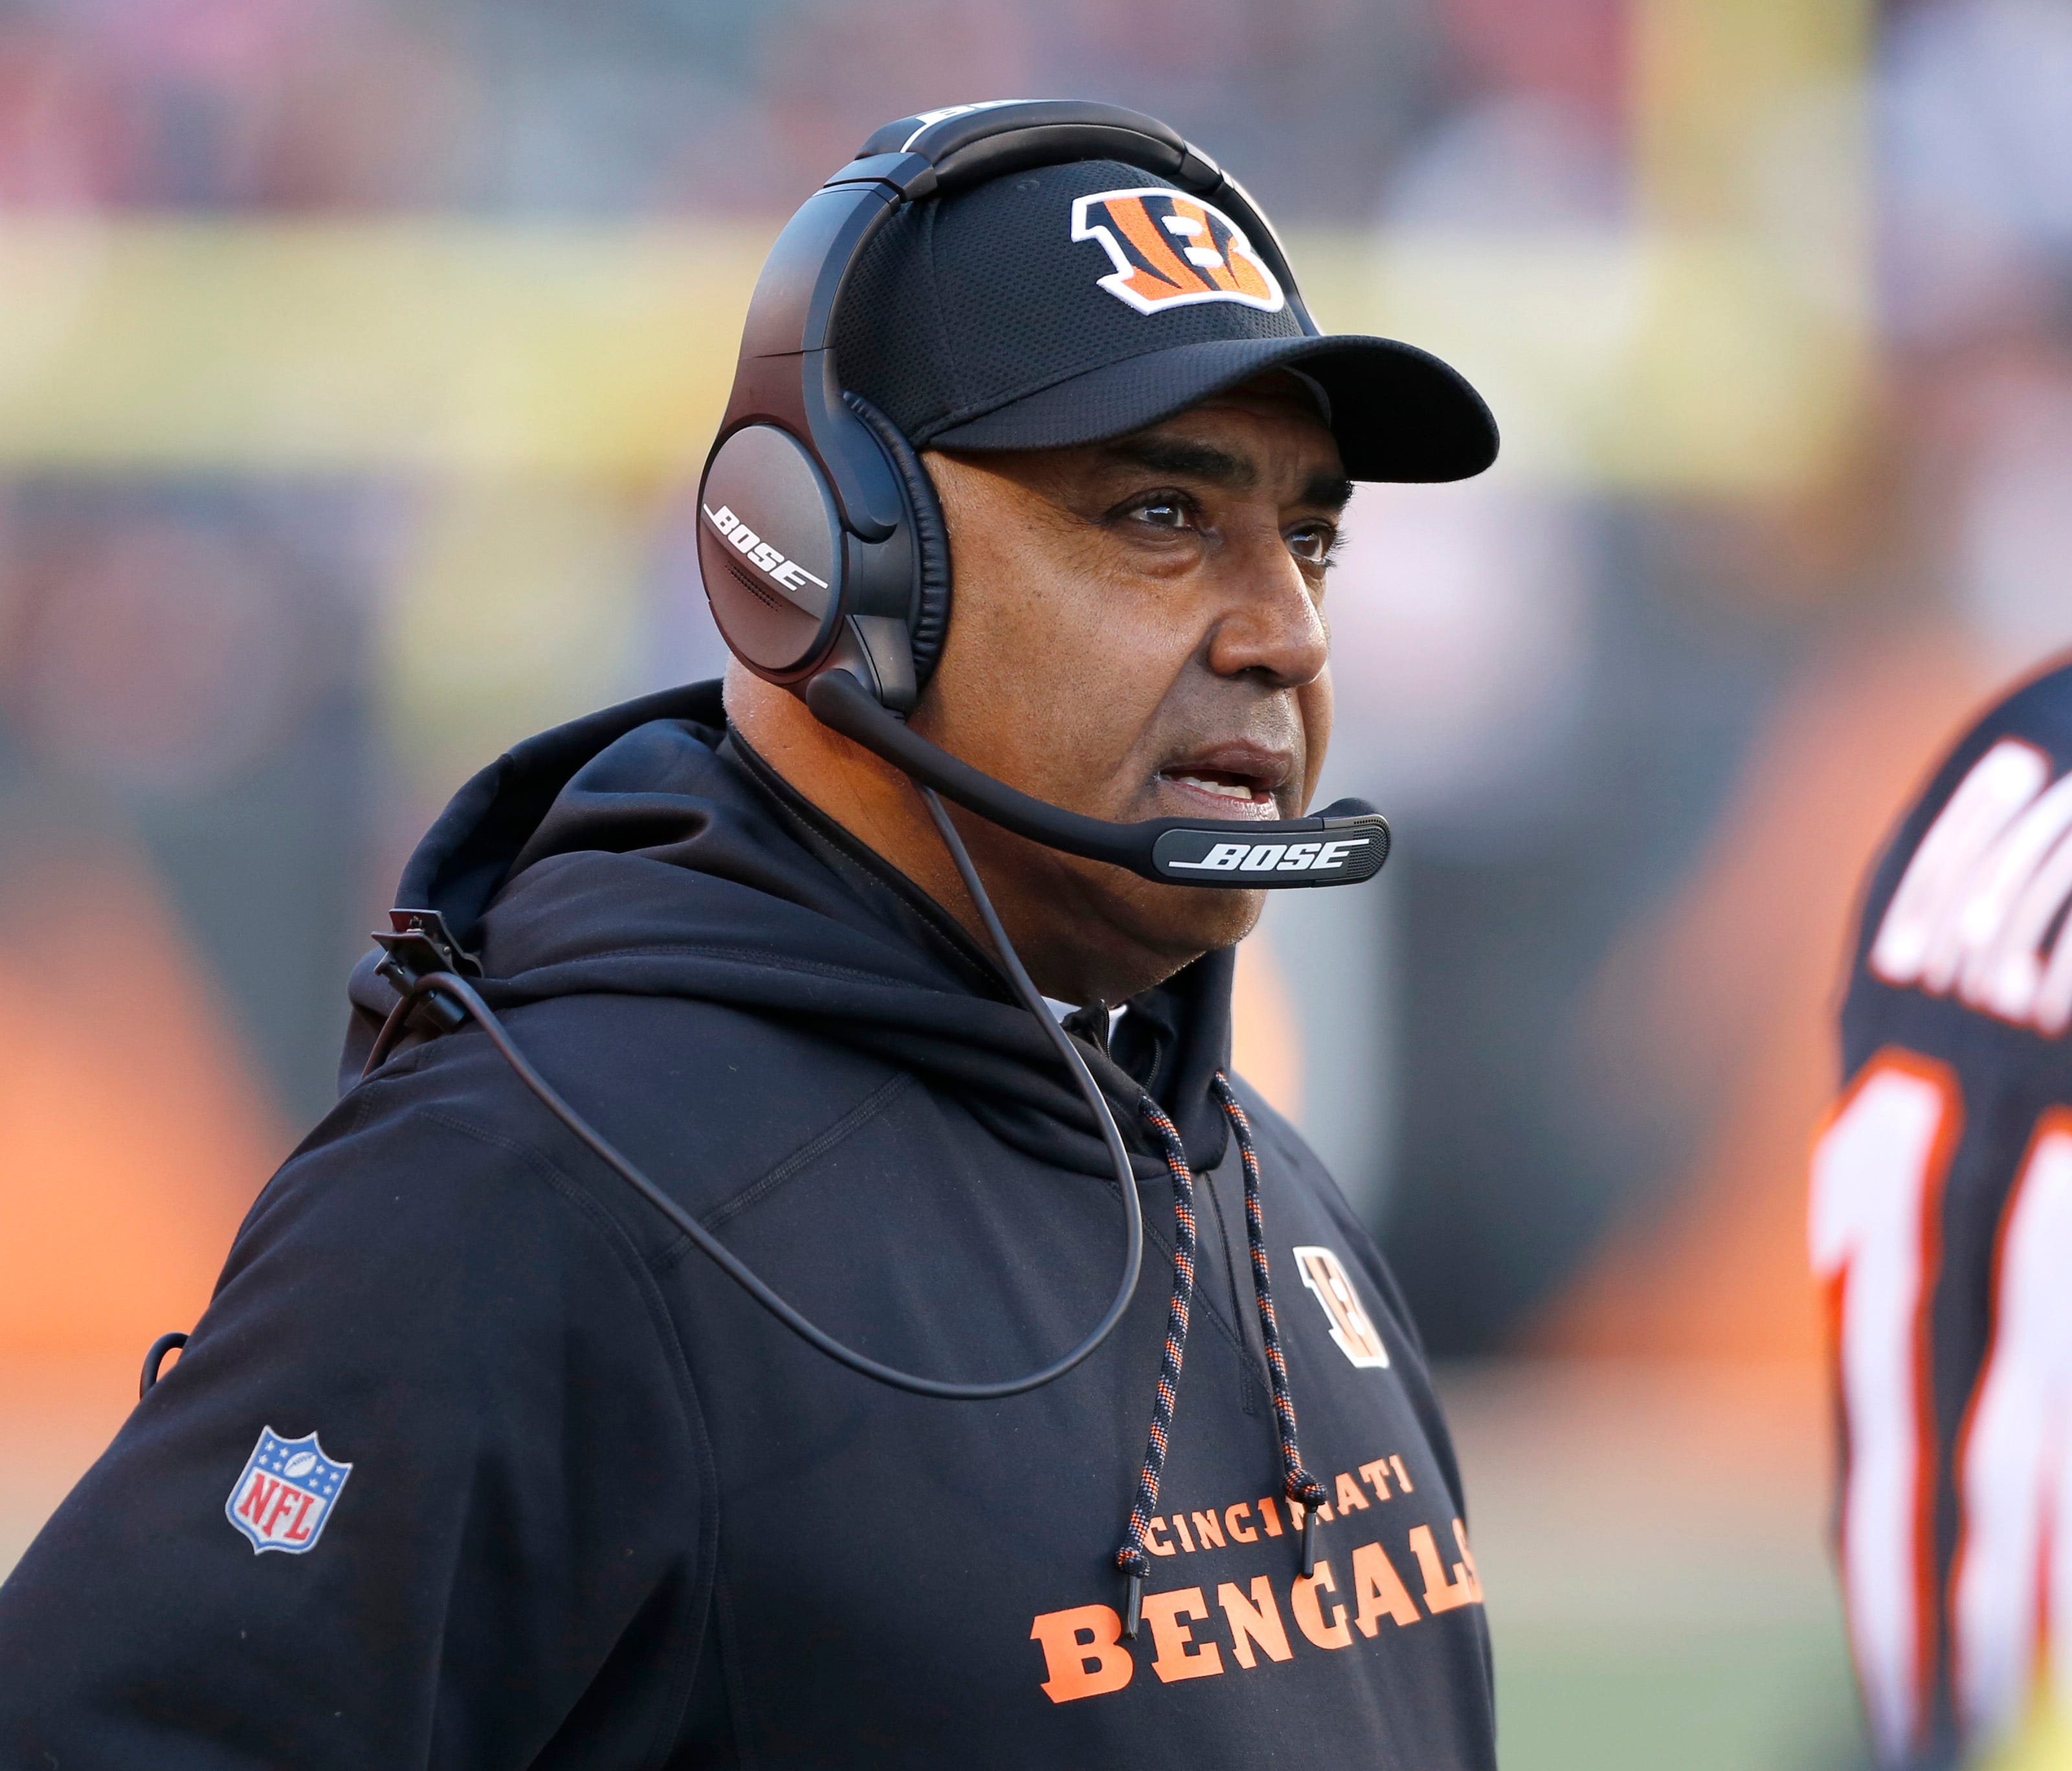 Cincinnati Bengals head coach Marvin Lewis watches from the sideline against the Chicago Bears during the second half at Paul Brown Stadium.